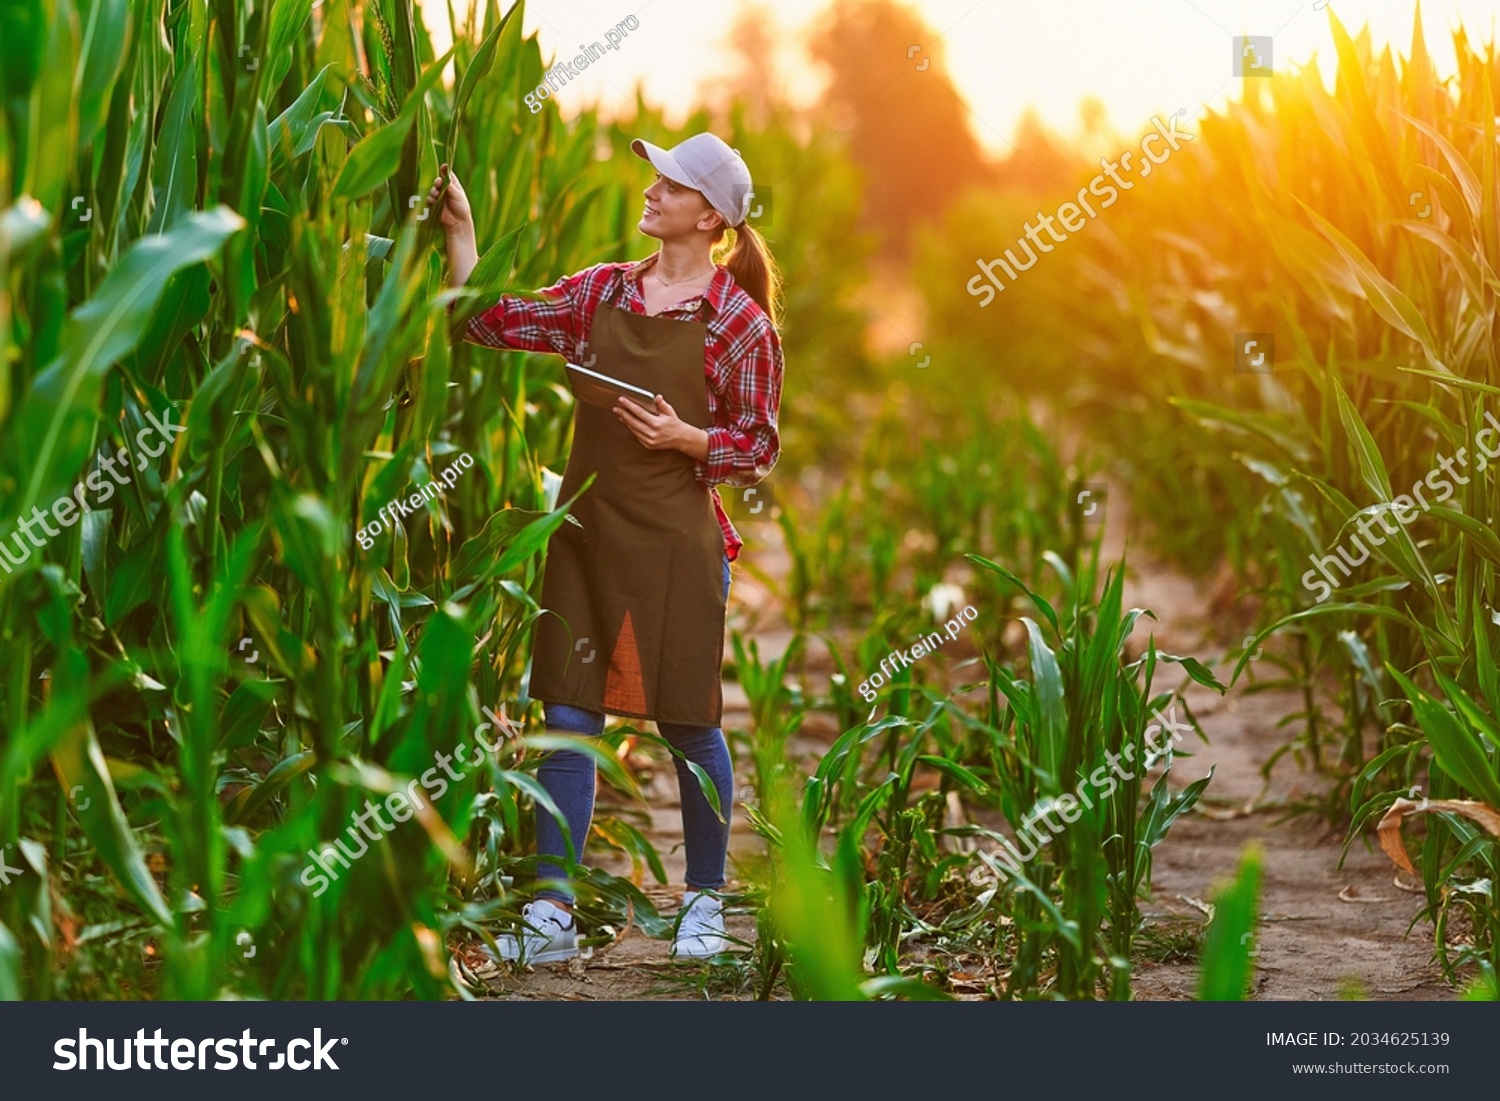 Smart woman farmer agronomist using digital tablet for examining and inspecting quality control of produce corn crop. Modern technologies in agriculture management and agribusiness #2034625139